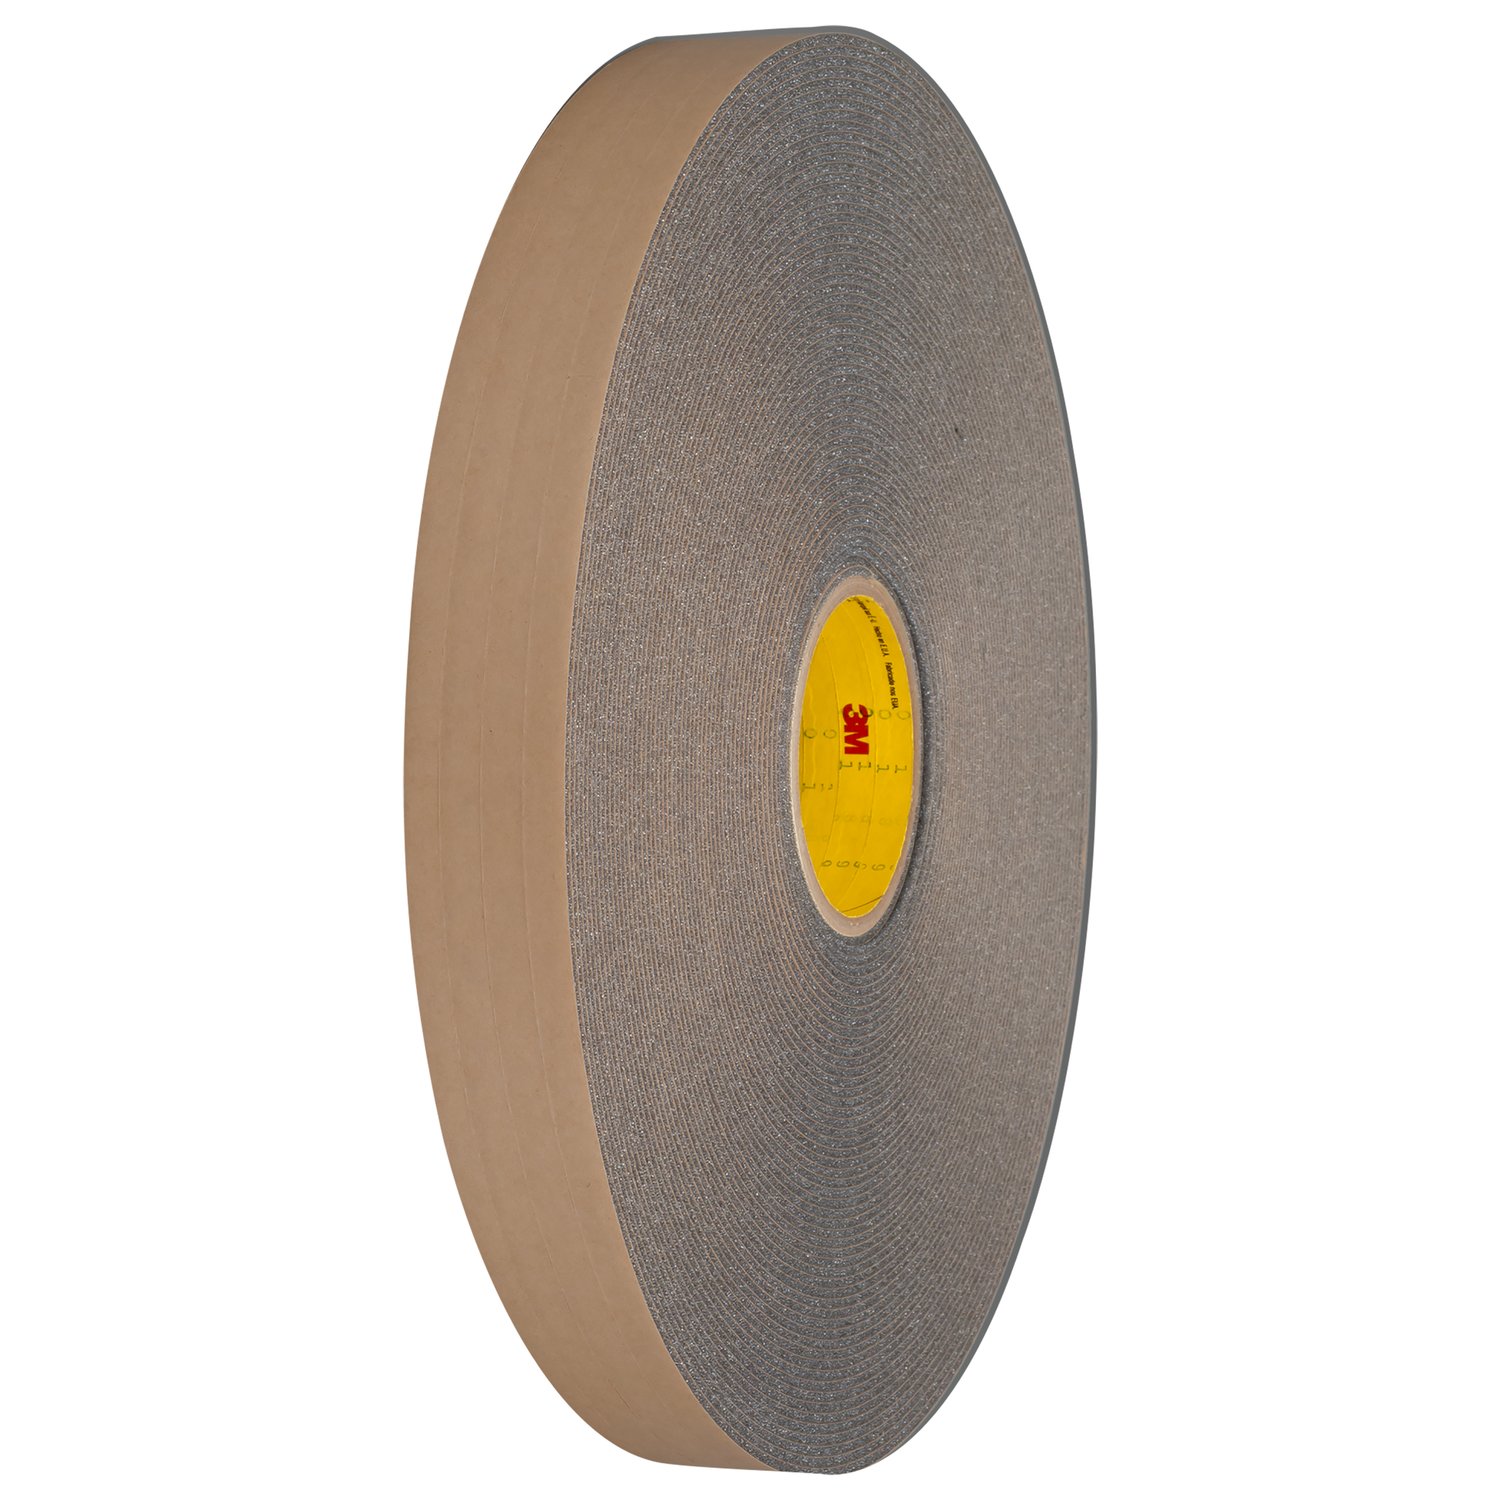 7100072657 - 3M Urethane Foam Tape 4314, Charcoal, Gray, Roll, Config